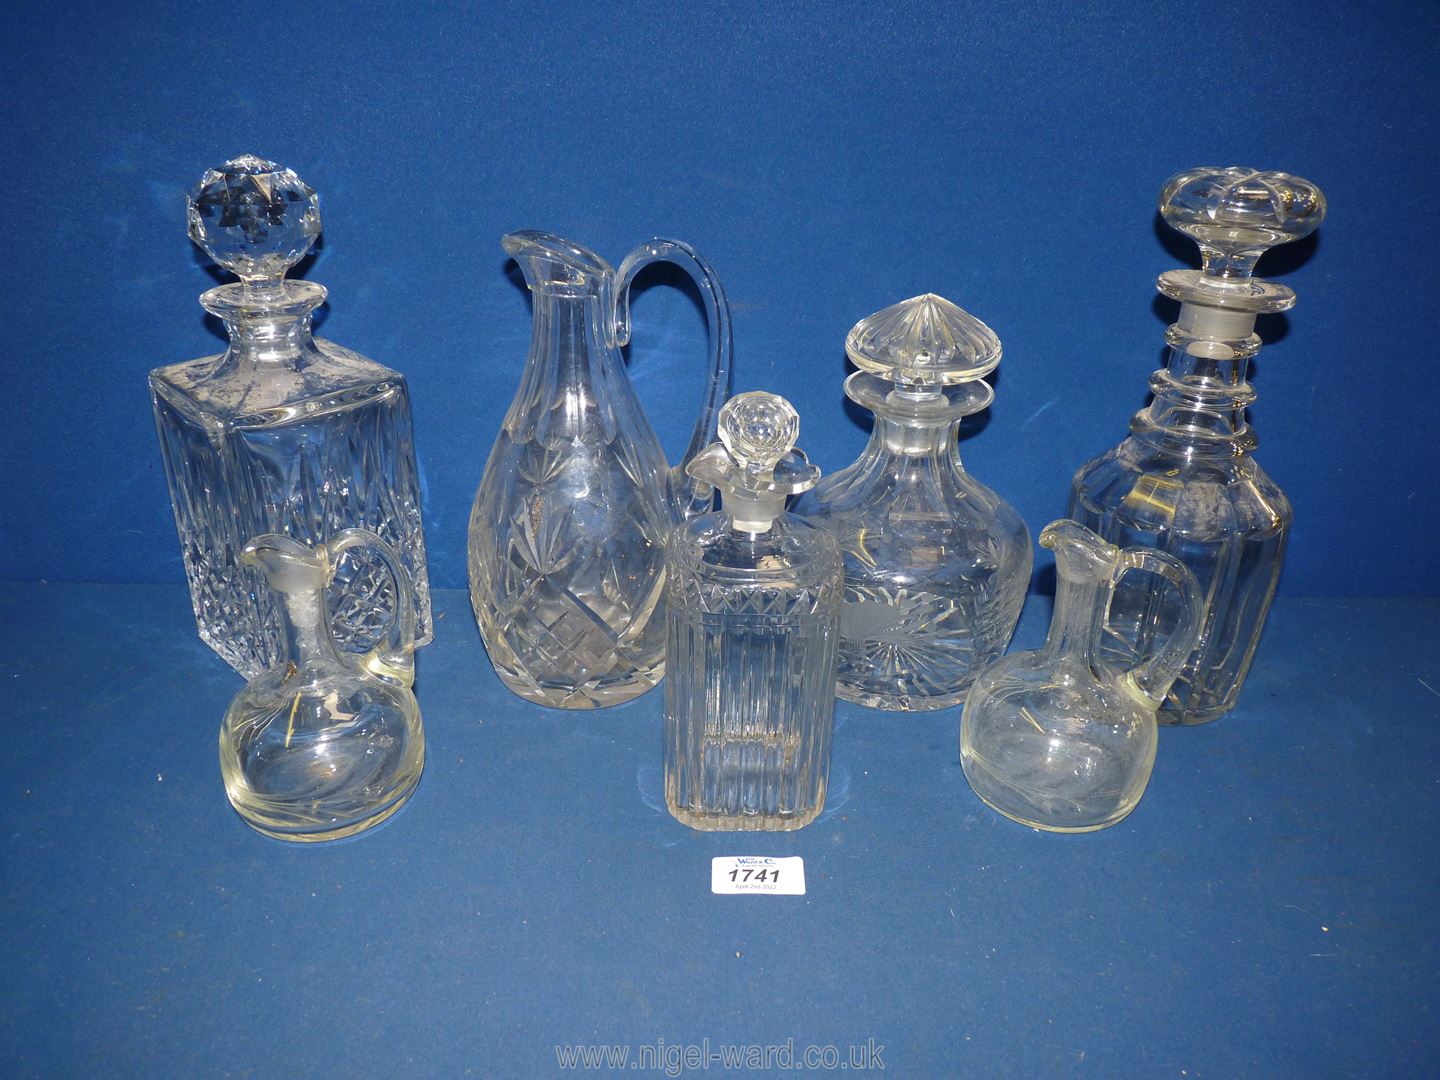 Four glass decanters and stoppers, a water jug and two small vinaigrette/ oil bottles.